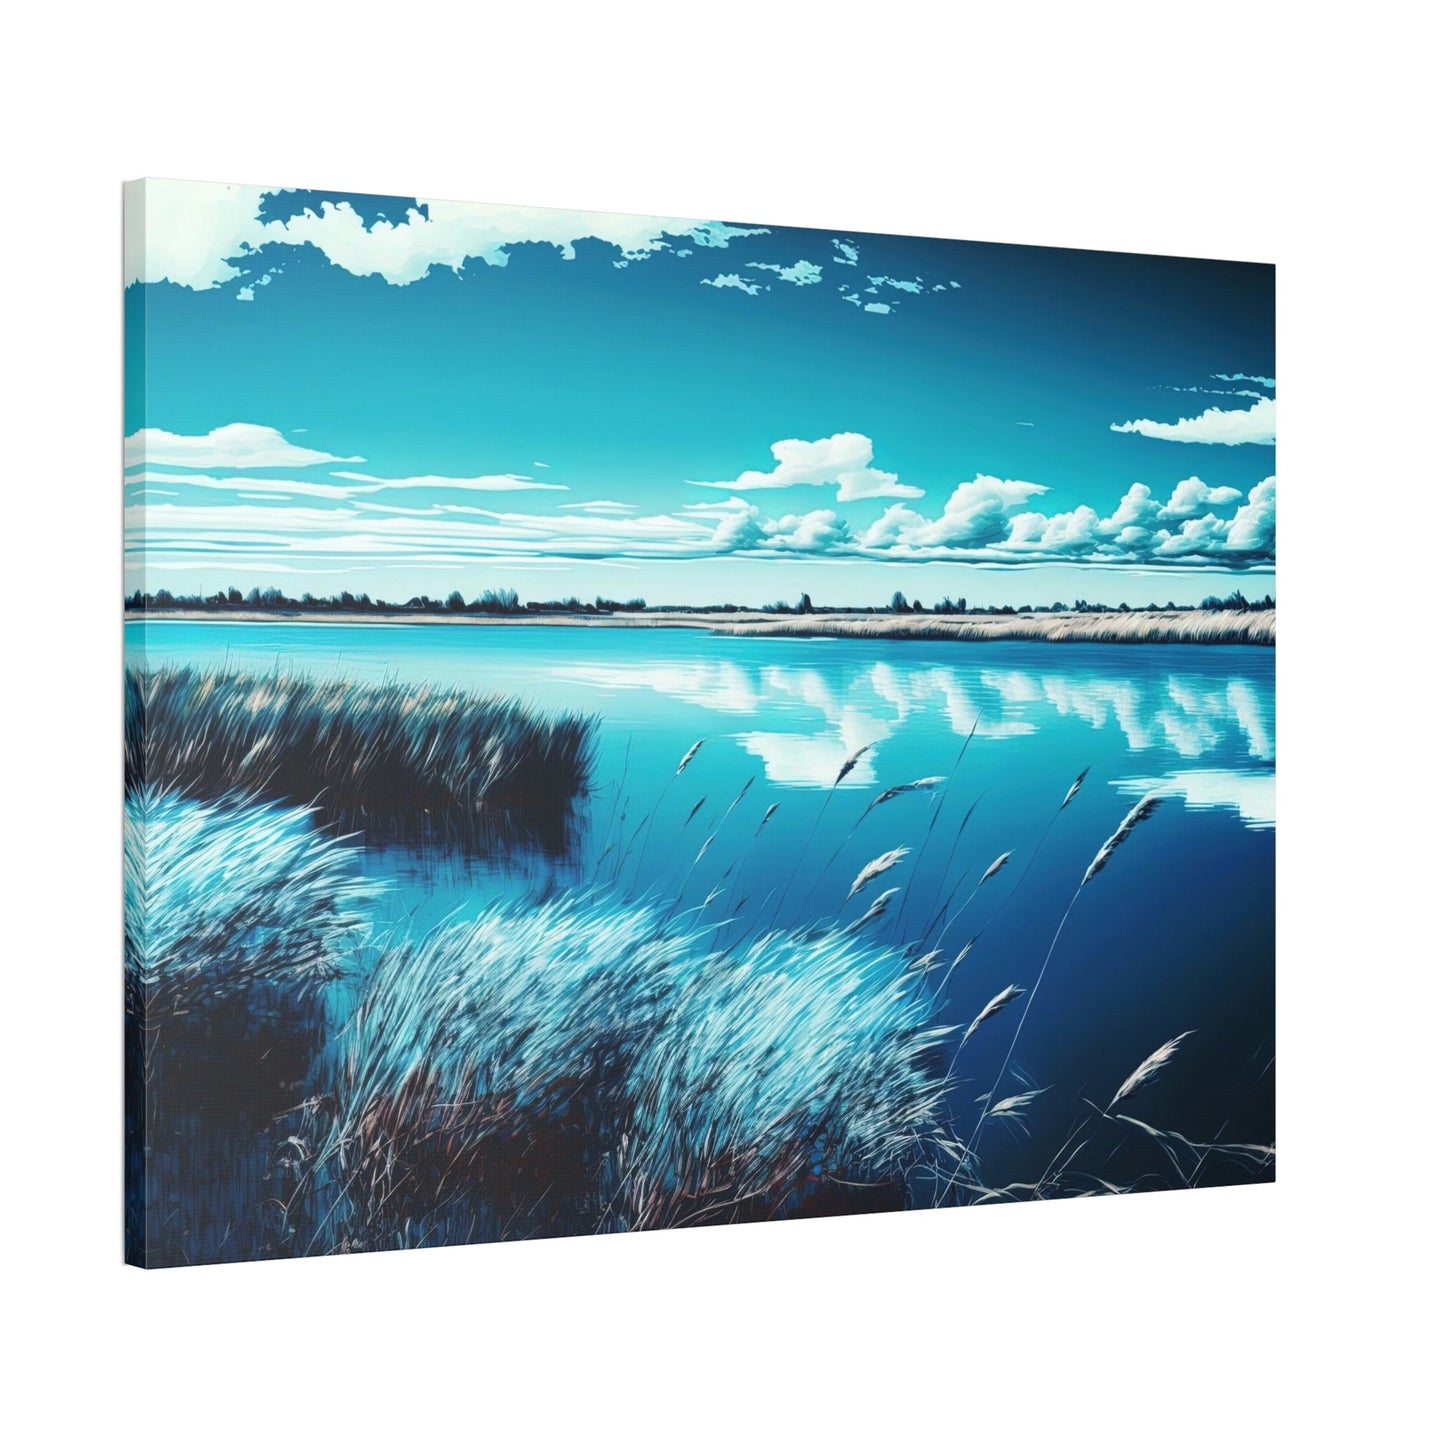 Lakeside Harmony: Print on Canvas with Tranquil Lake Scenery